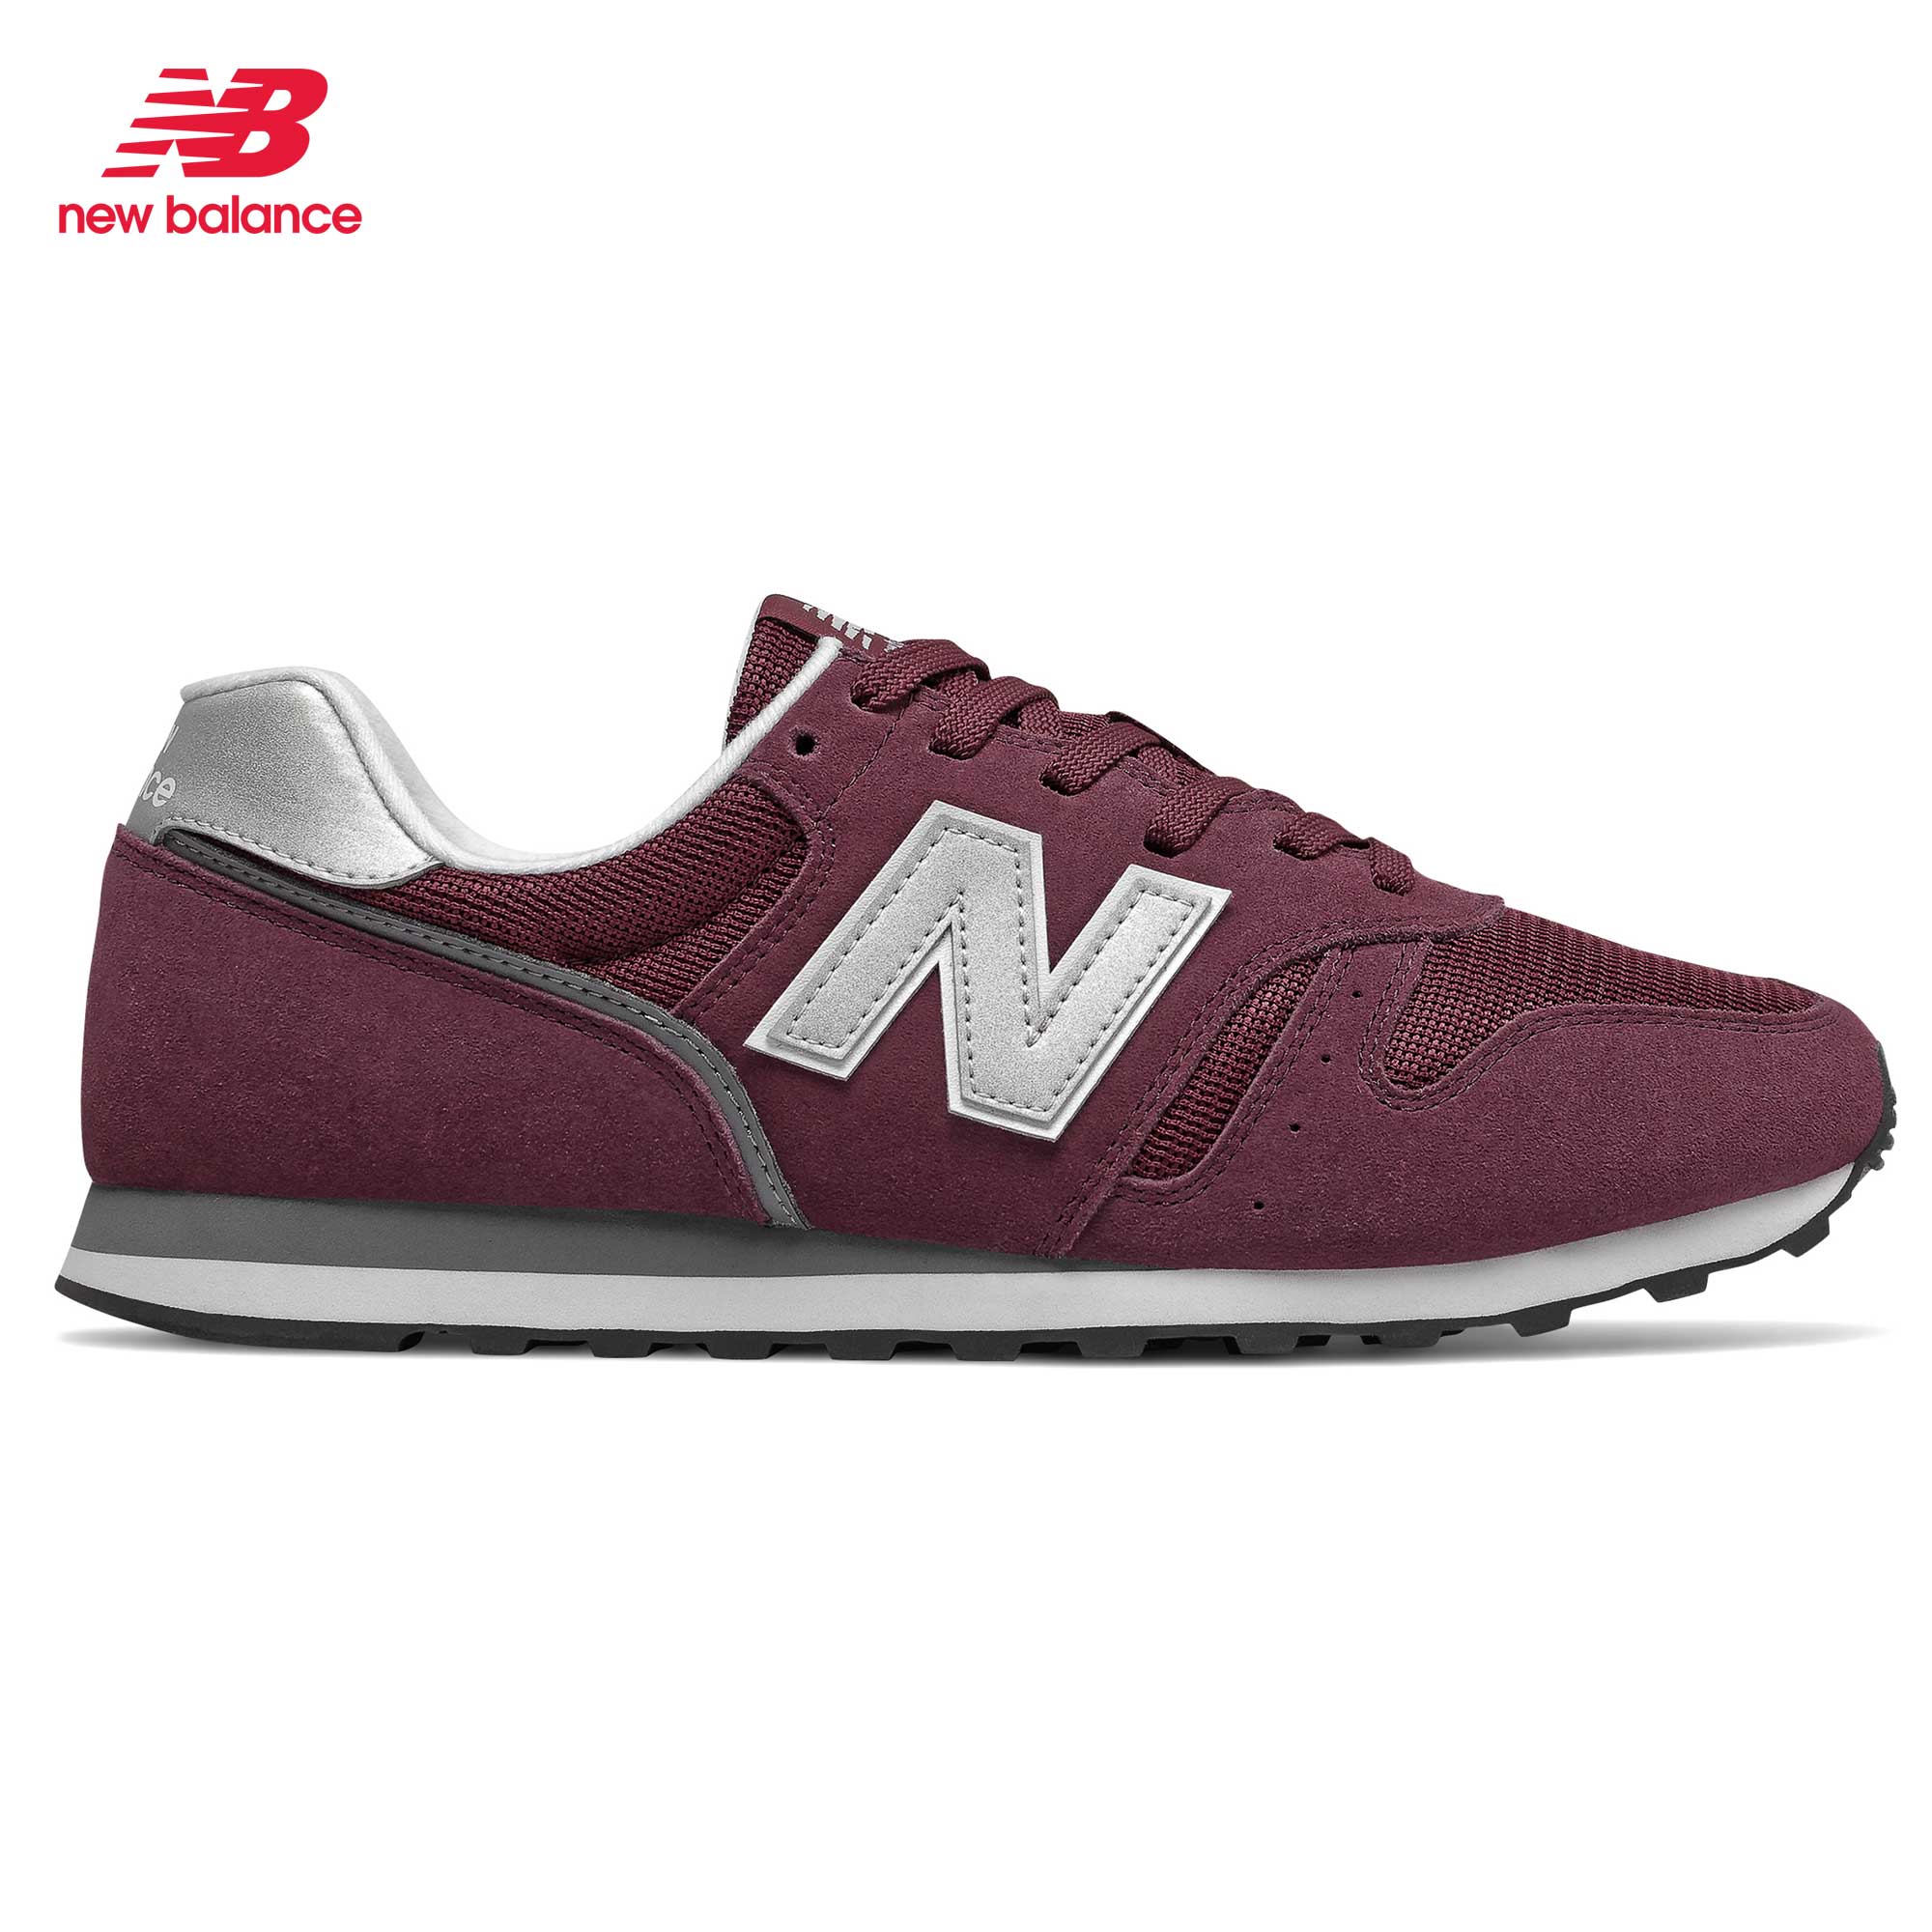 red new balance shoes mens